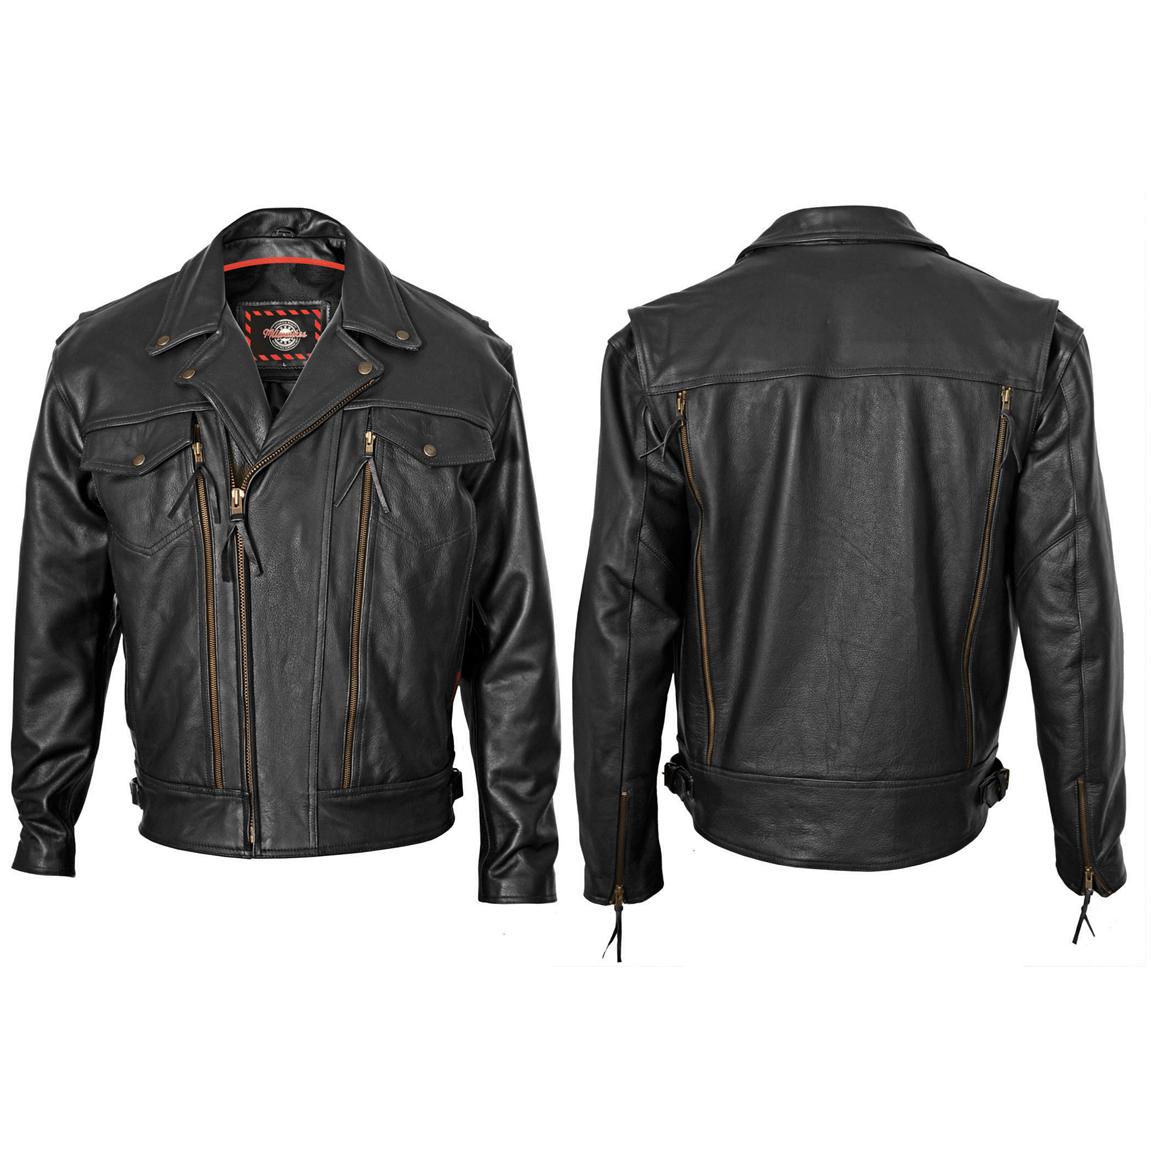 Men's Classic Style Leather Motorcycle Jacket by Milwaukee